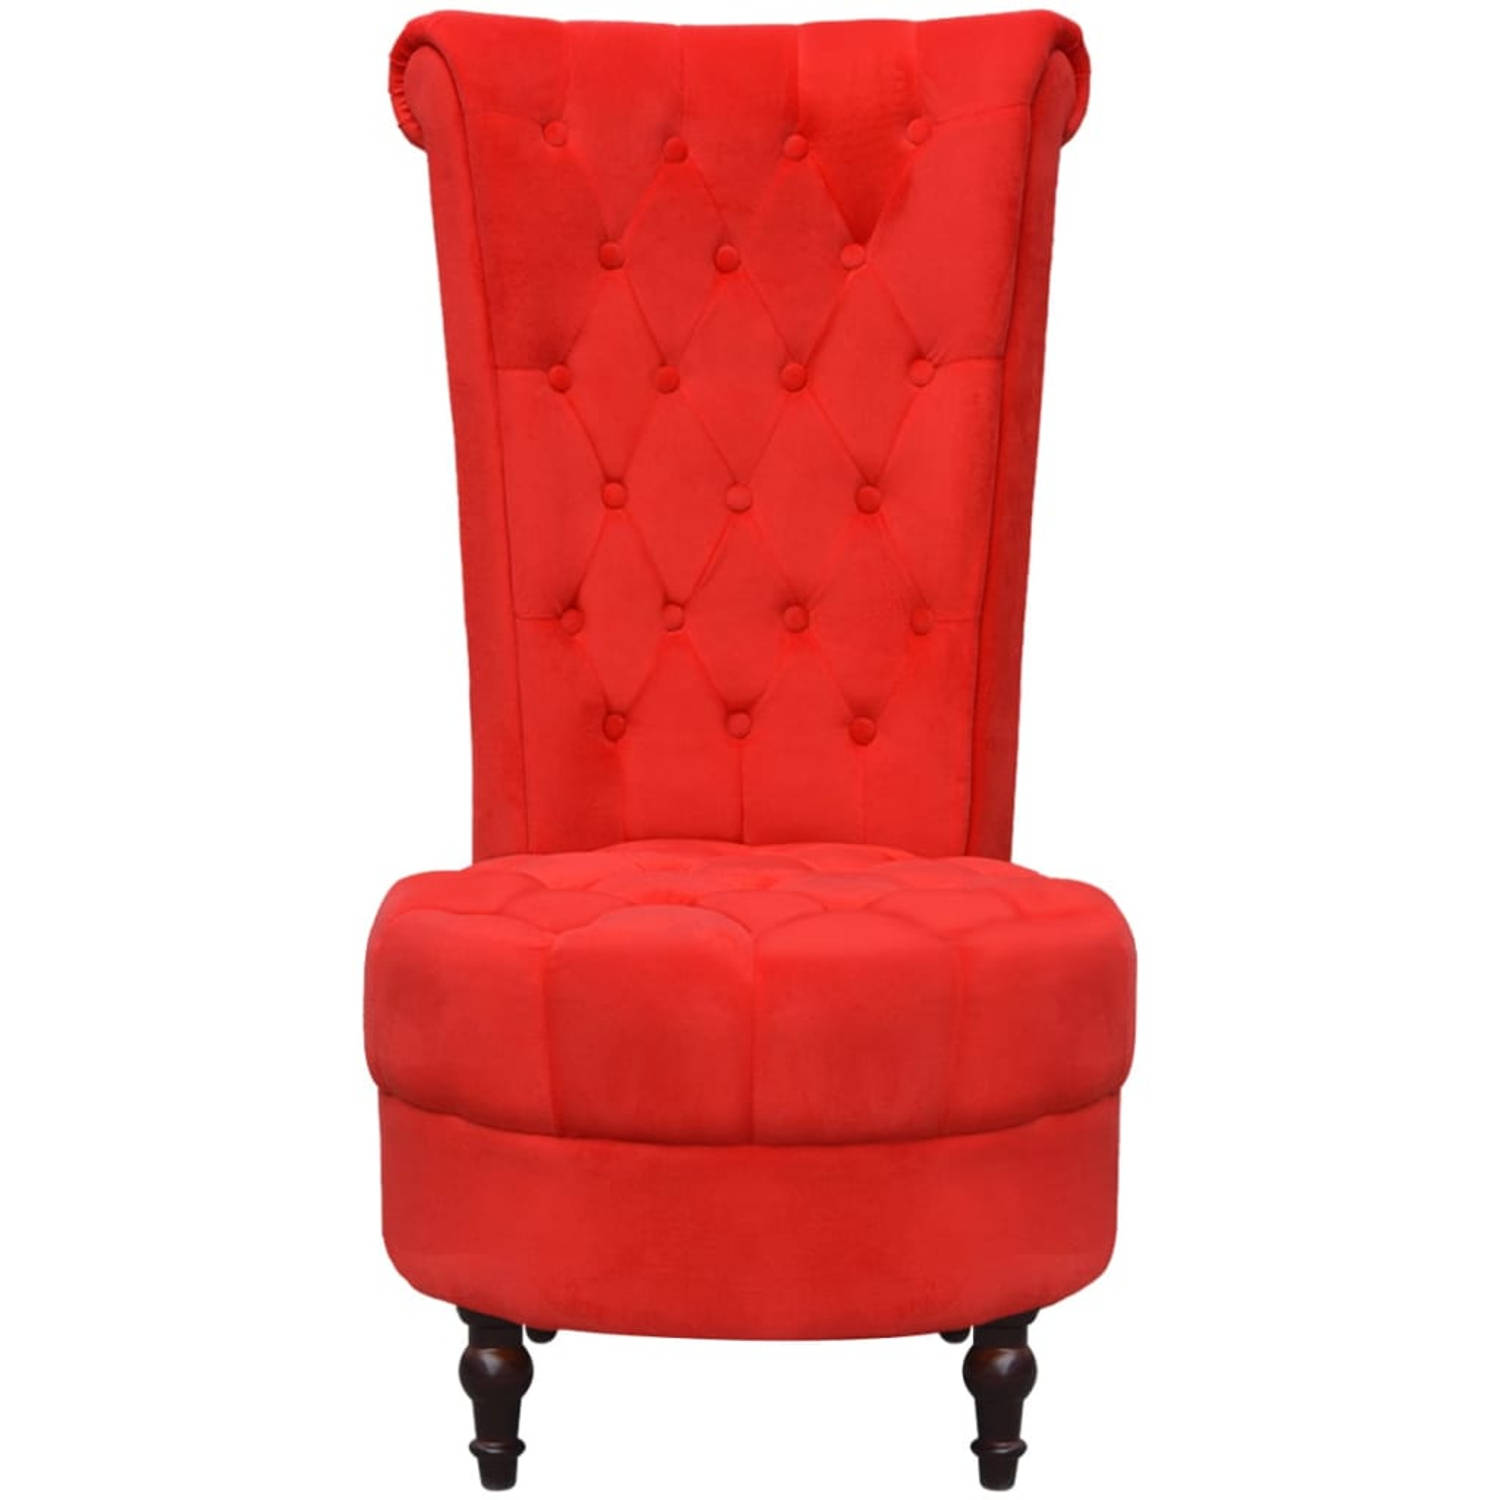 The Living Store Fauteuil - Hoge Rugleuning - Rood - 63x85x119.5 cm